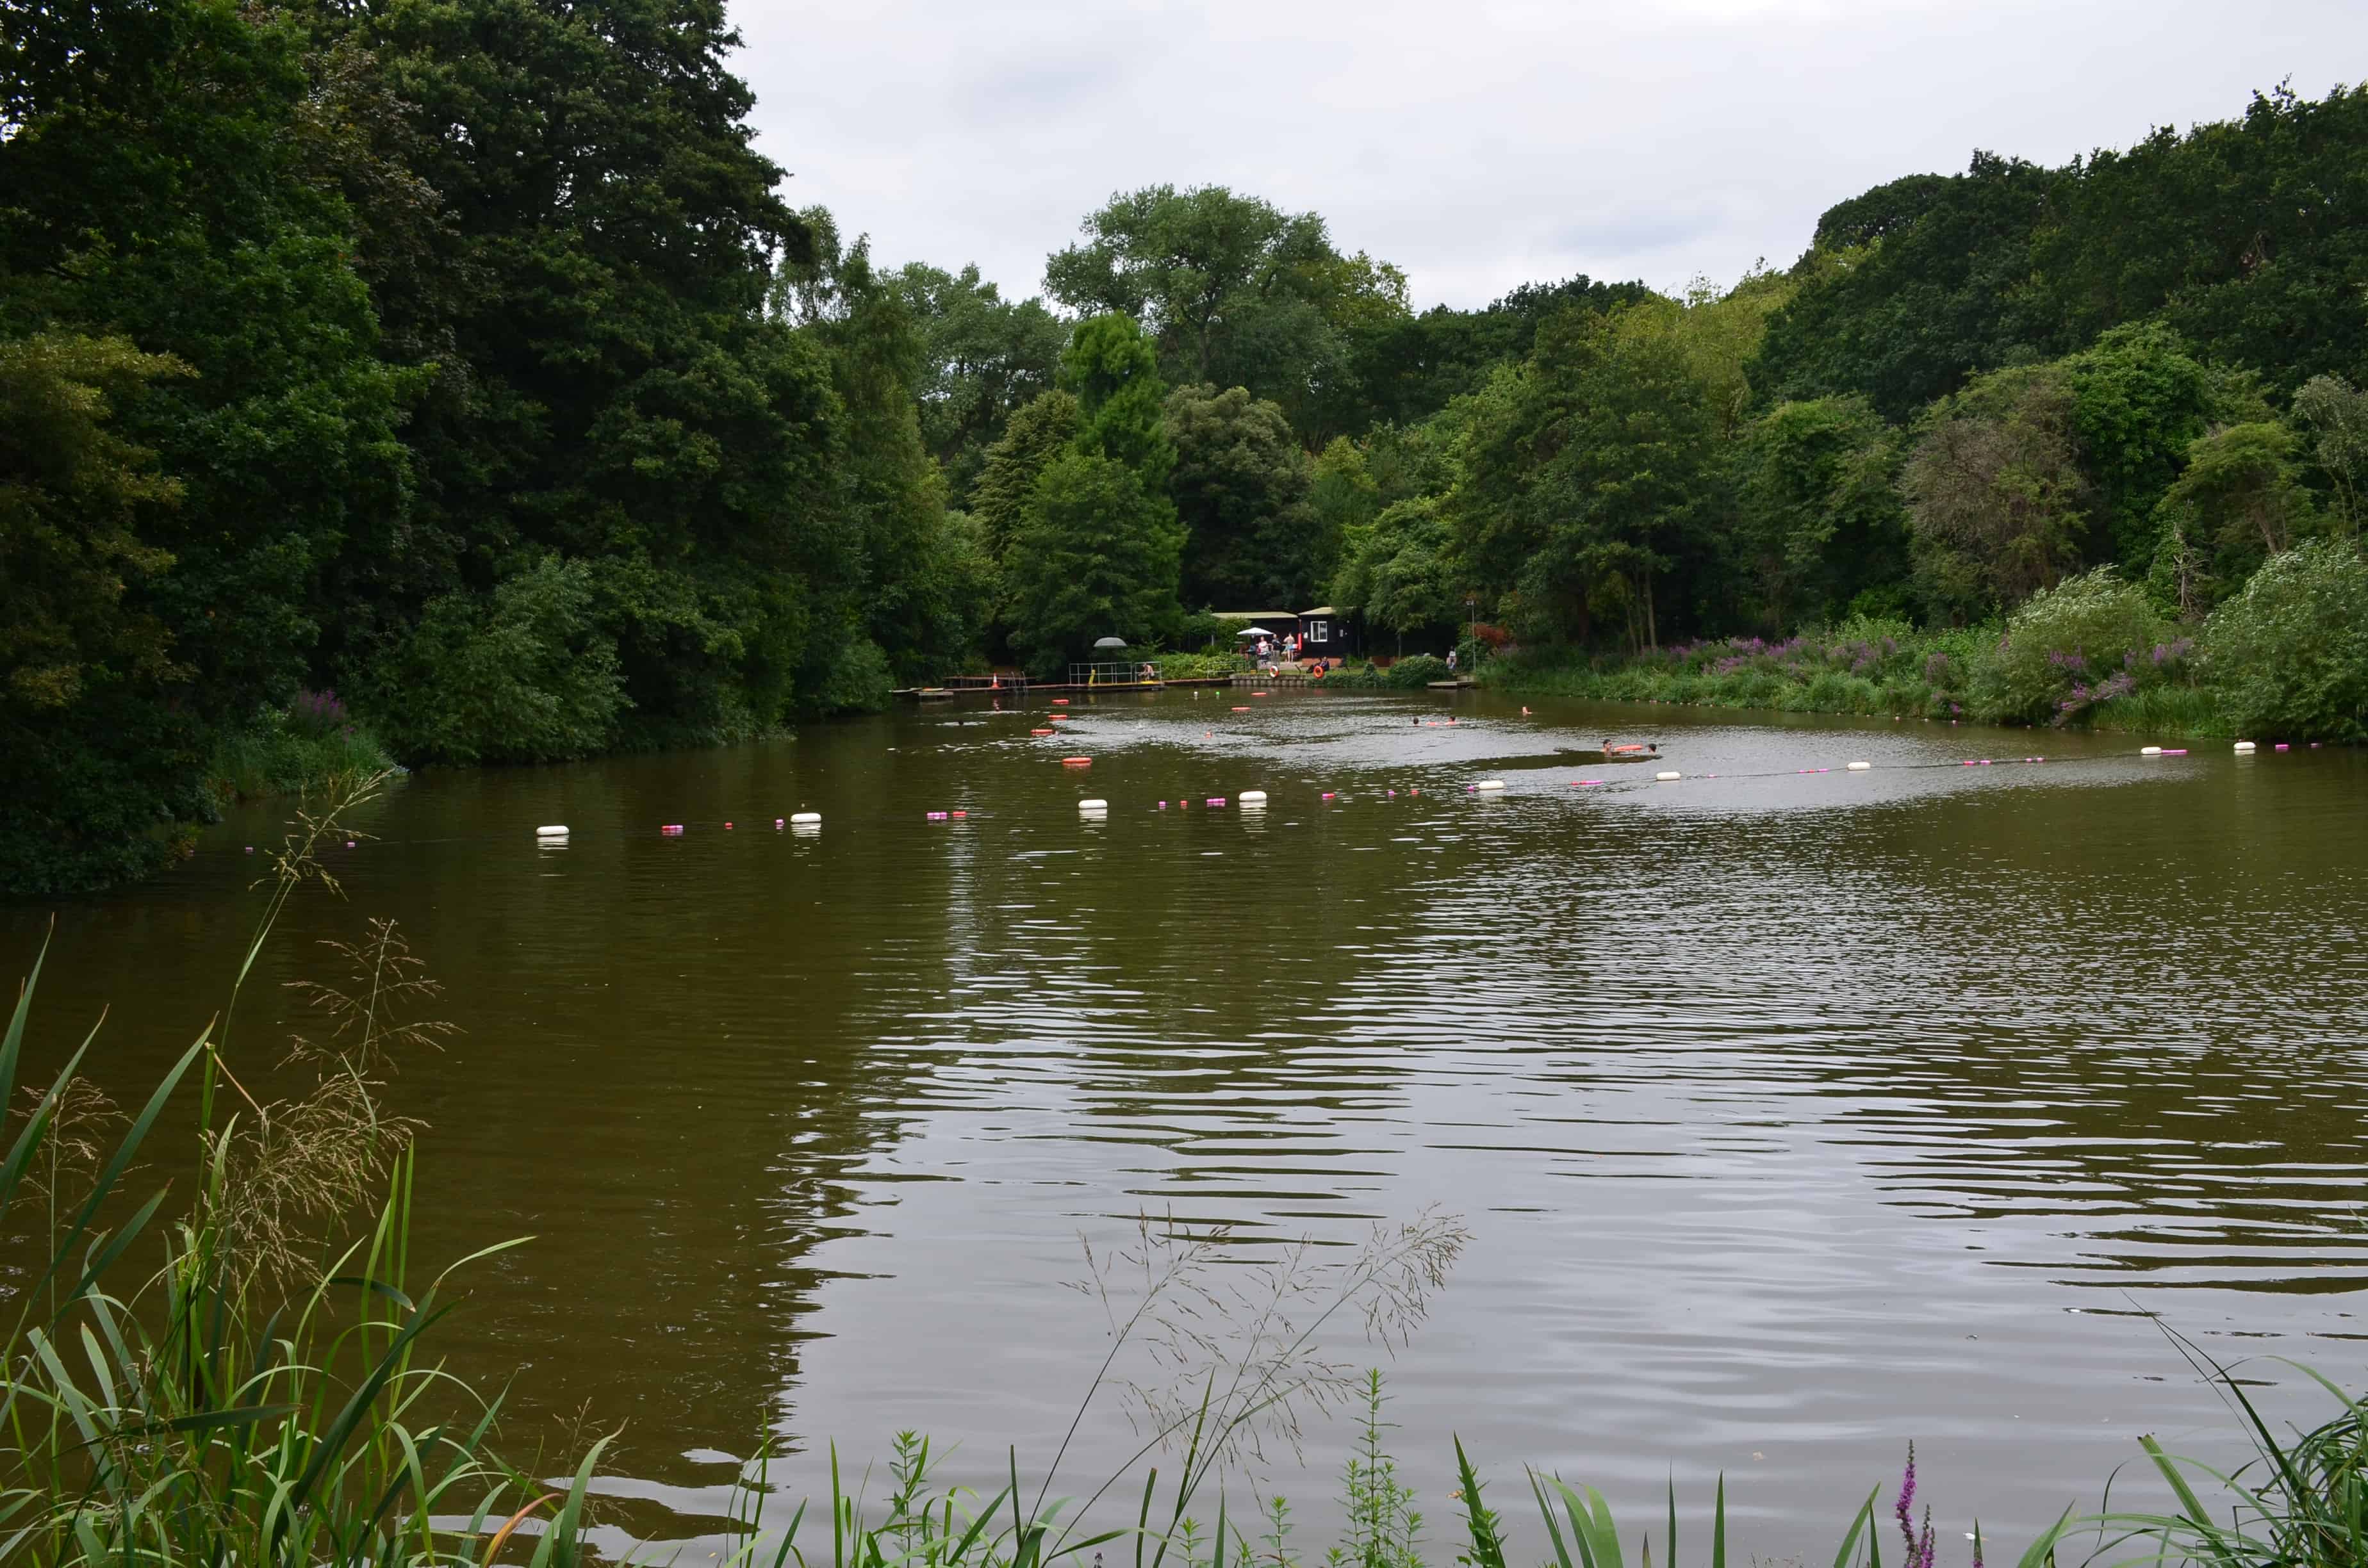 Mixed Pond at Hampstead Heath in London, England